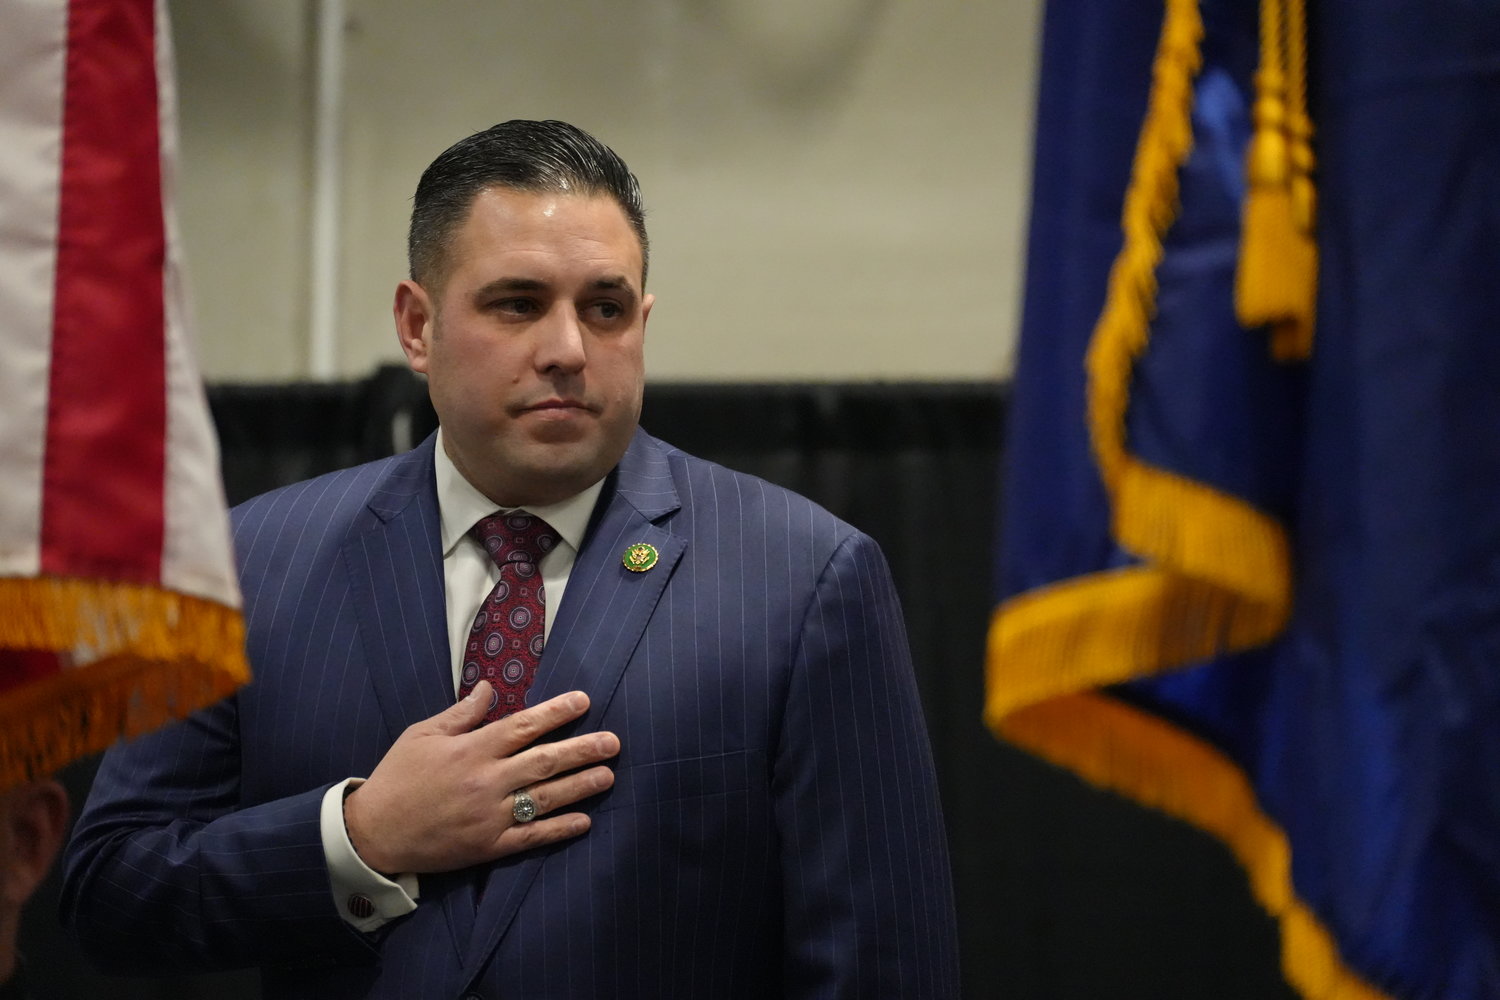 U.S. Rep. Anthony D’Esposito stands to recite the Pledge of Allegiance at his in-district swearing in ceremony at the David S. Mack Center for Training & Intelligence. D’Esposito is off to a quick start representing the 4th Congressional District, ready to try out his brand of bipartisanship in Washington.